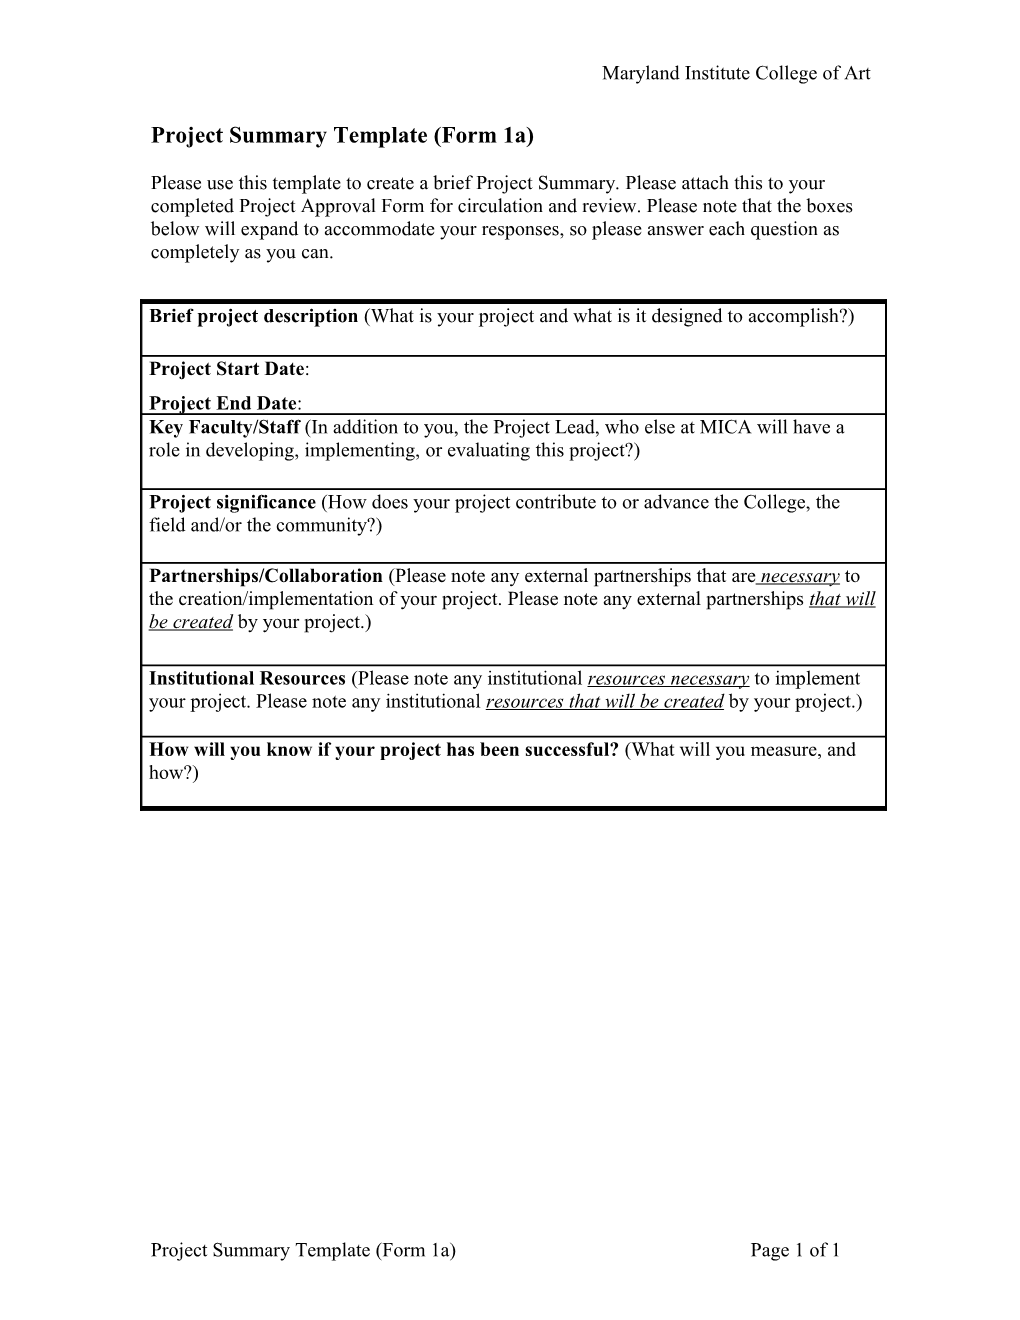 Proposal Summary Template